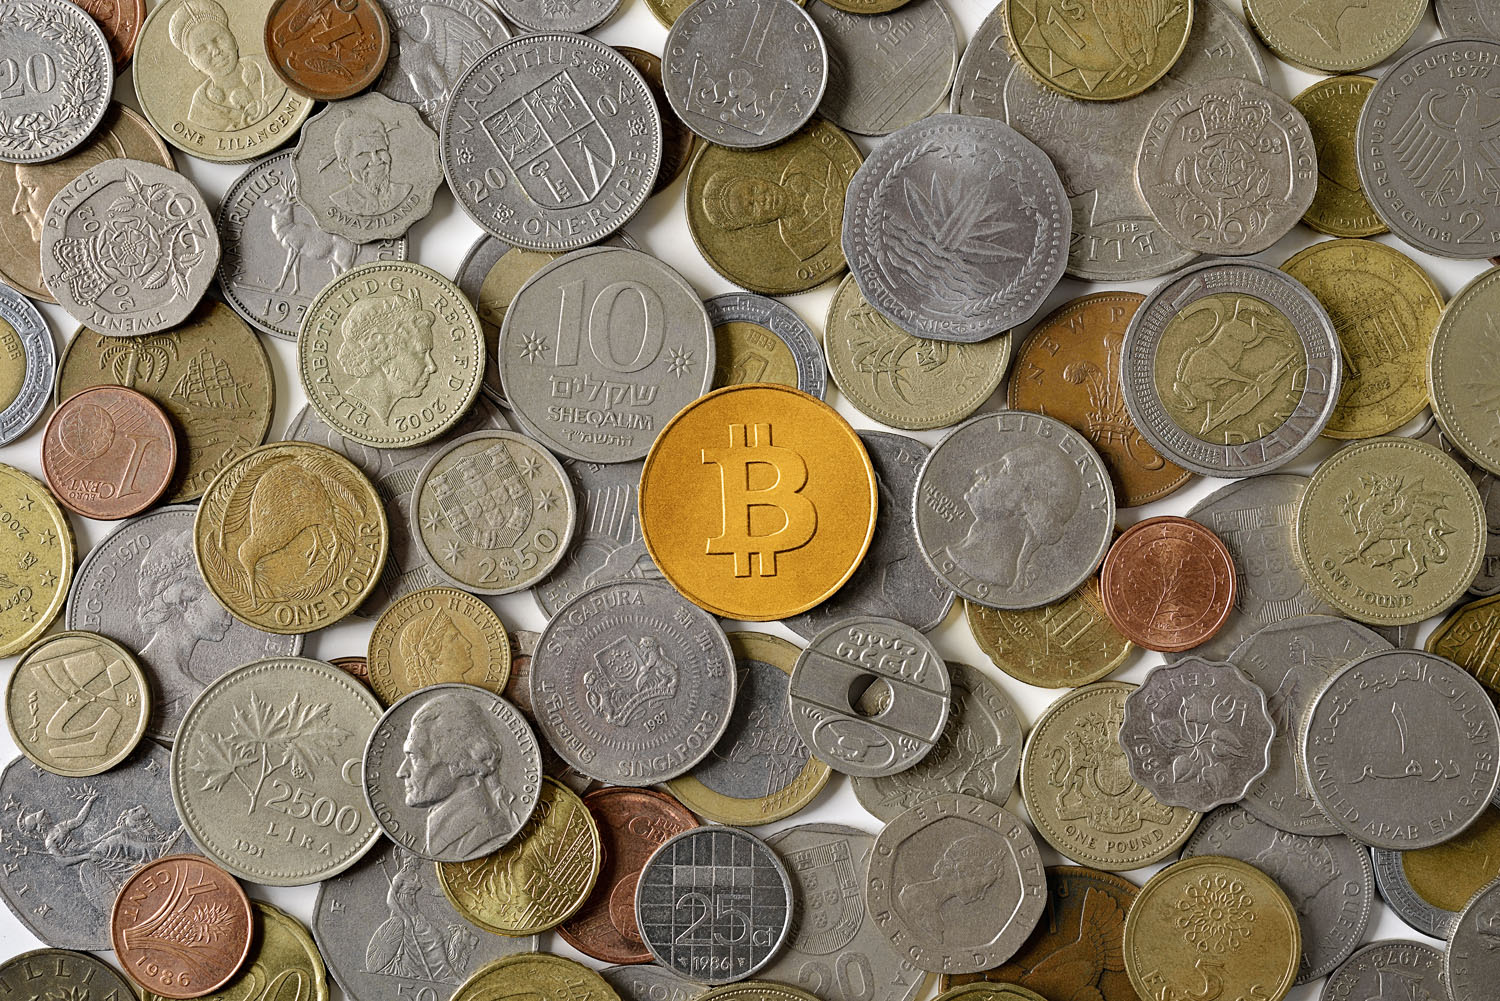 Bitcoin surrounded by various world coins. (David Malan&mdash;Getty Images)